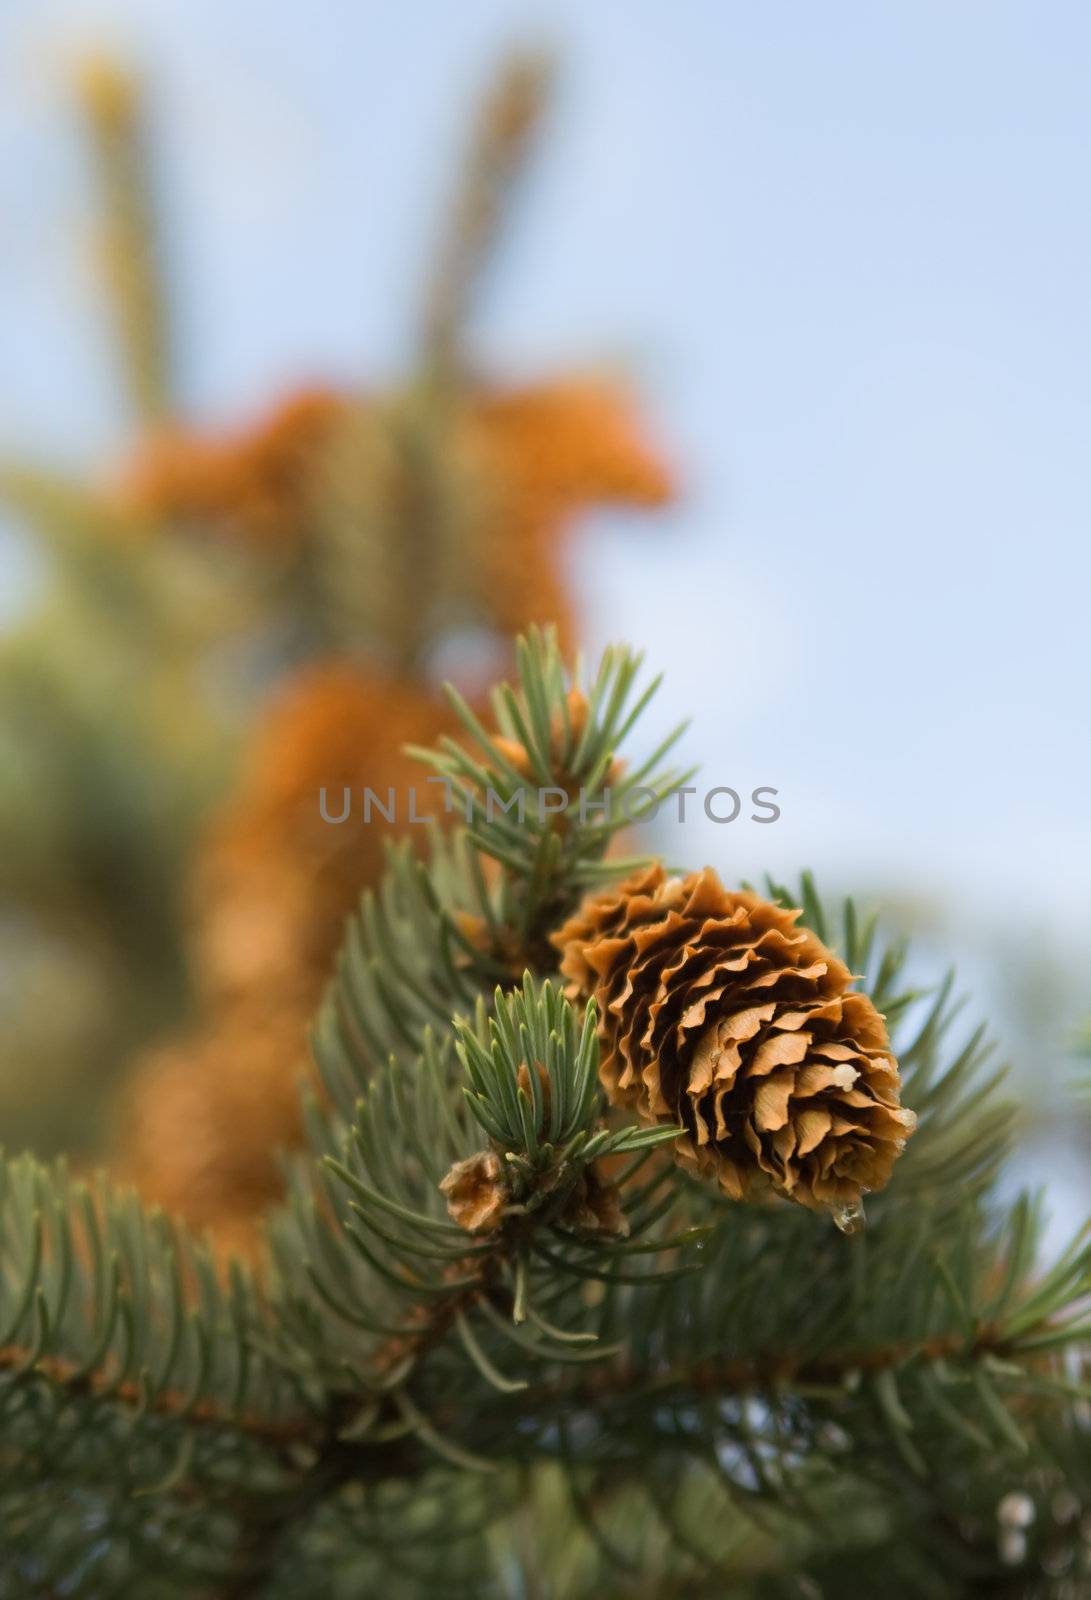 Closeup image of cone on fir-tree branch by serpl